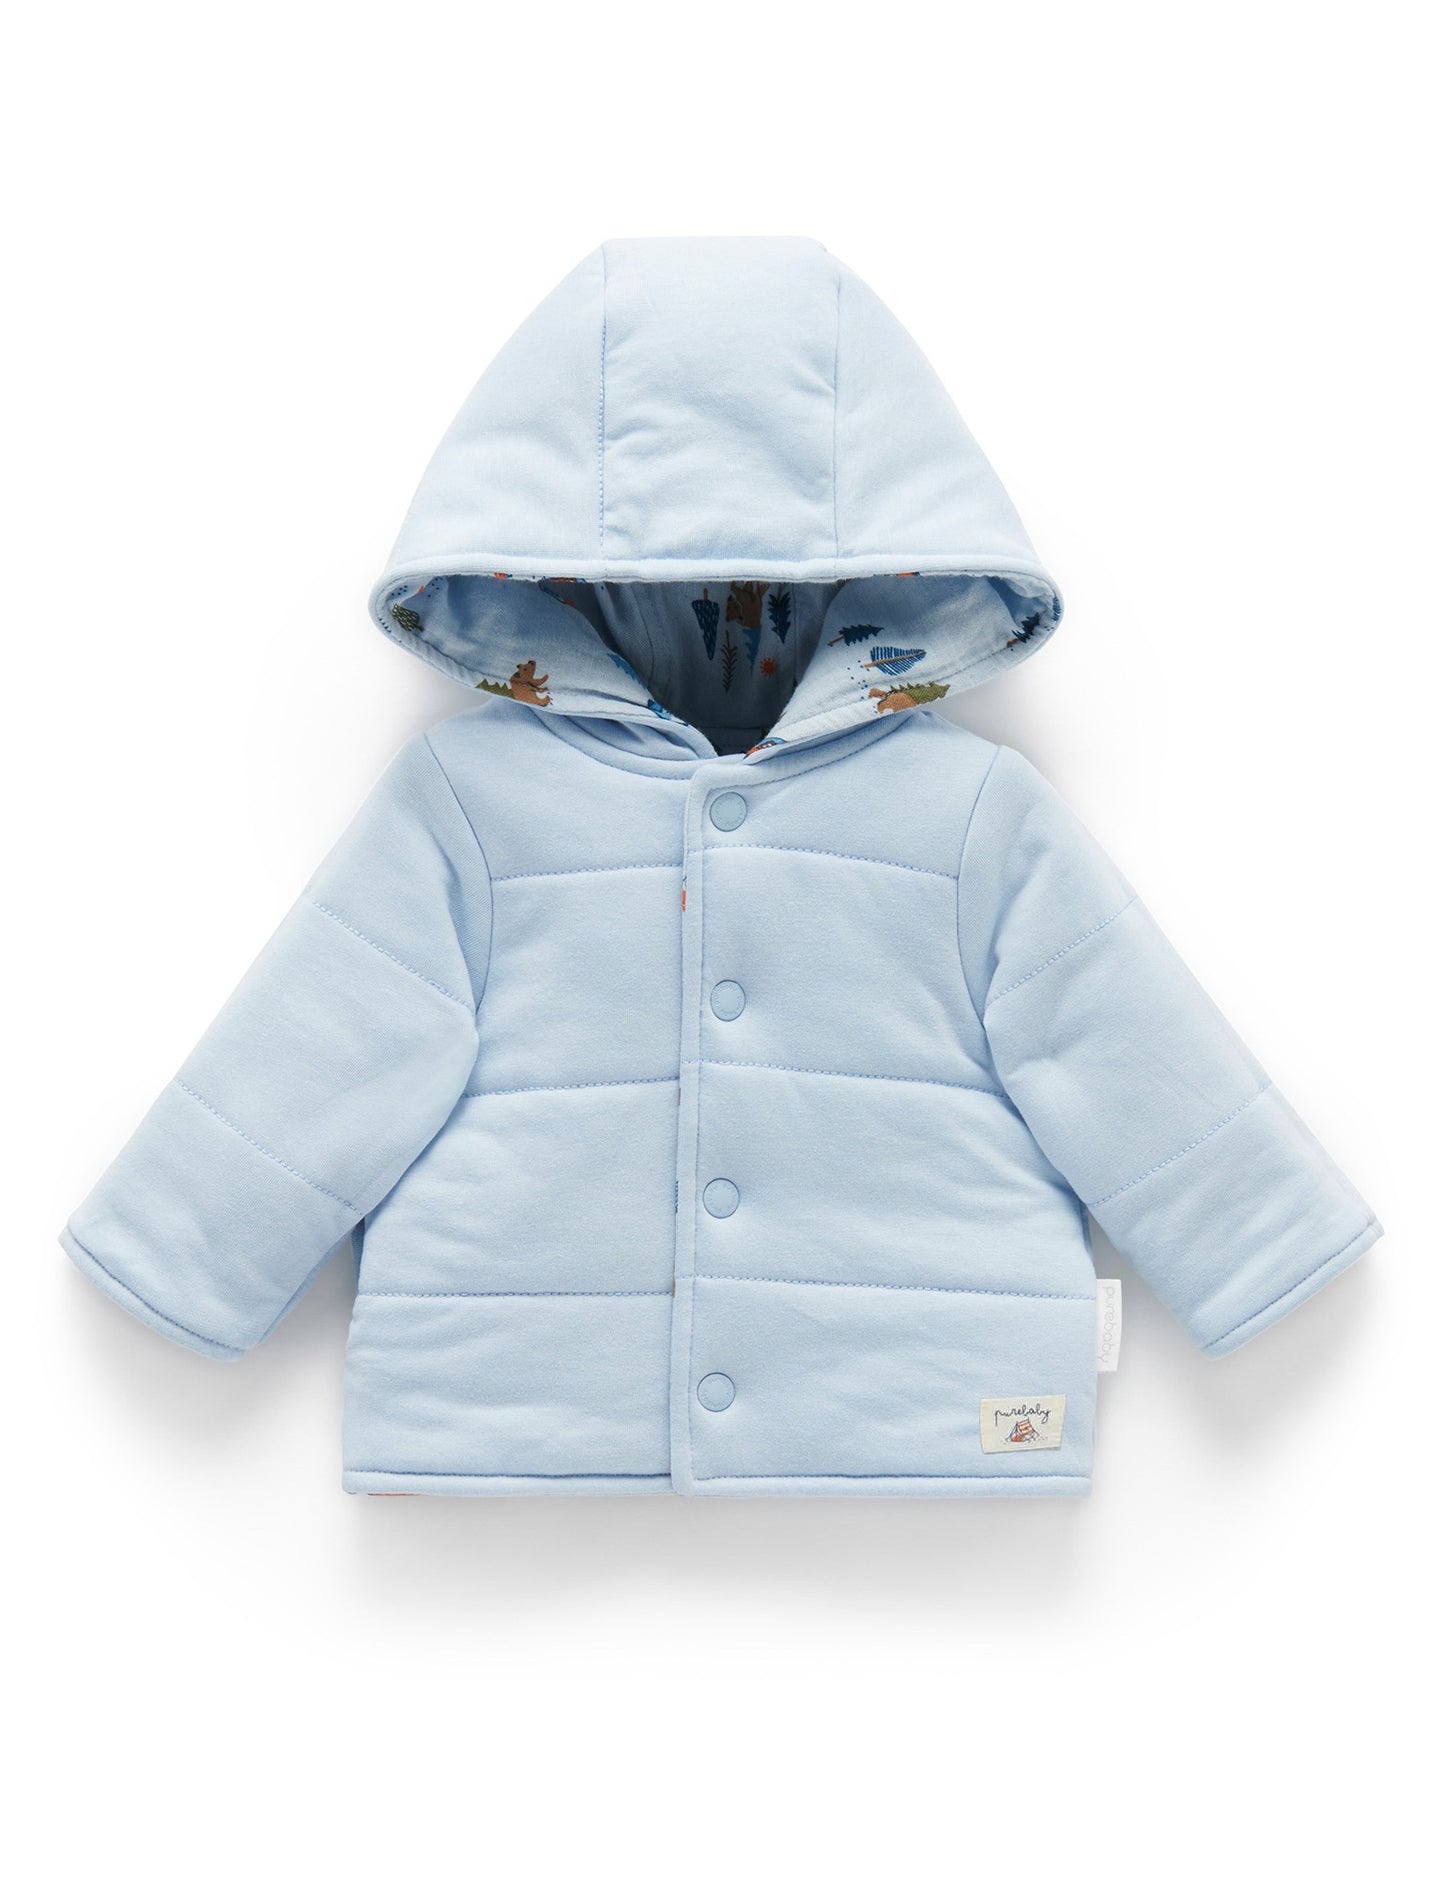 Purebaby Purebaby Reversible Jacket Great Outddors Print PN1036W22